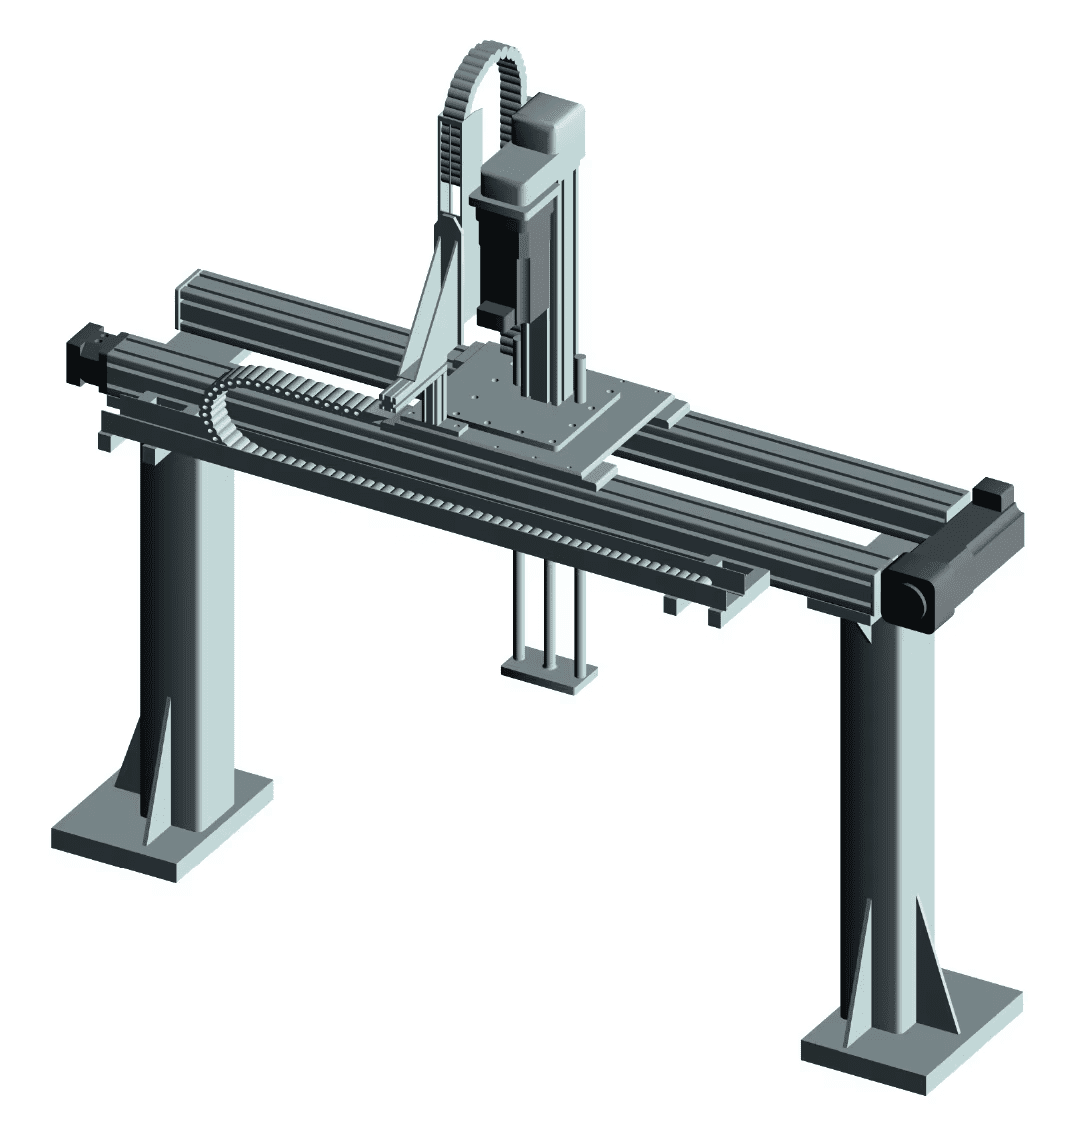 Parker Gantry Robot System 3: Two Axis XX''-Z